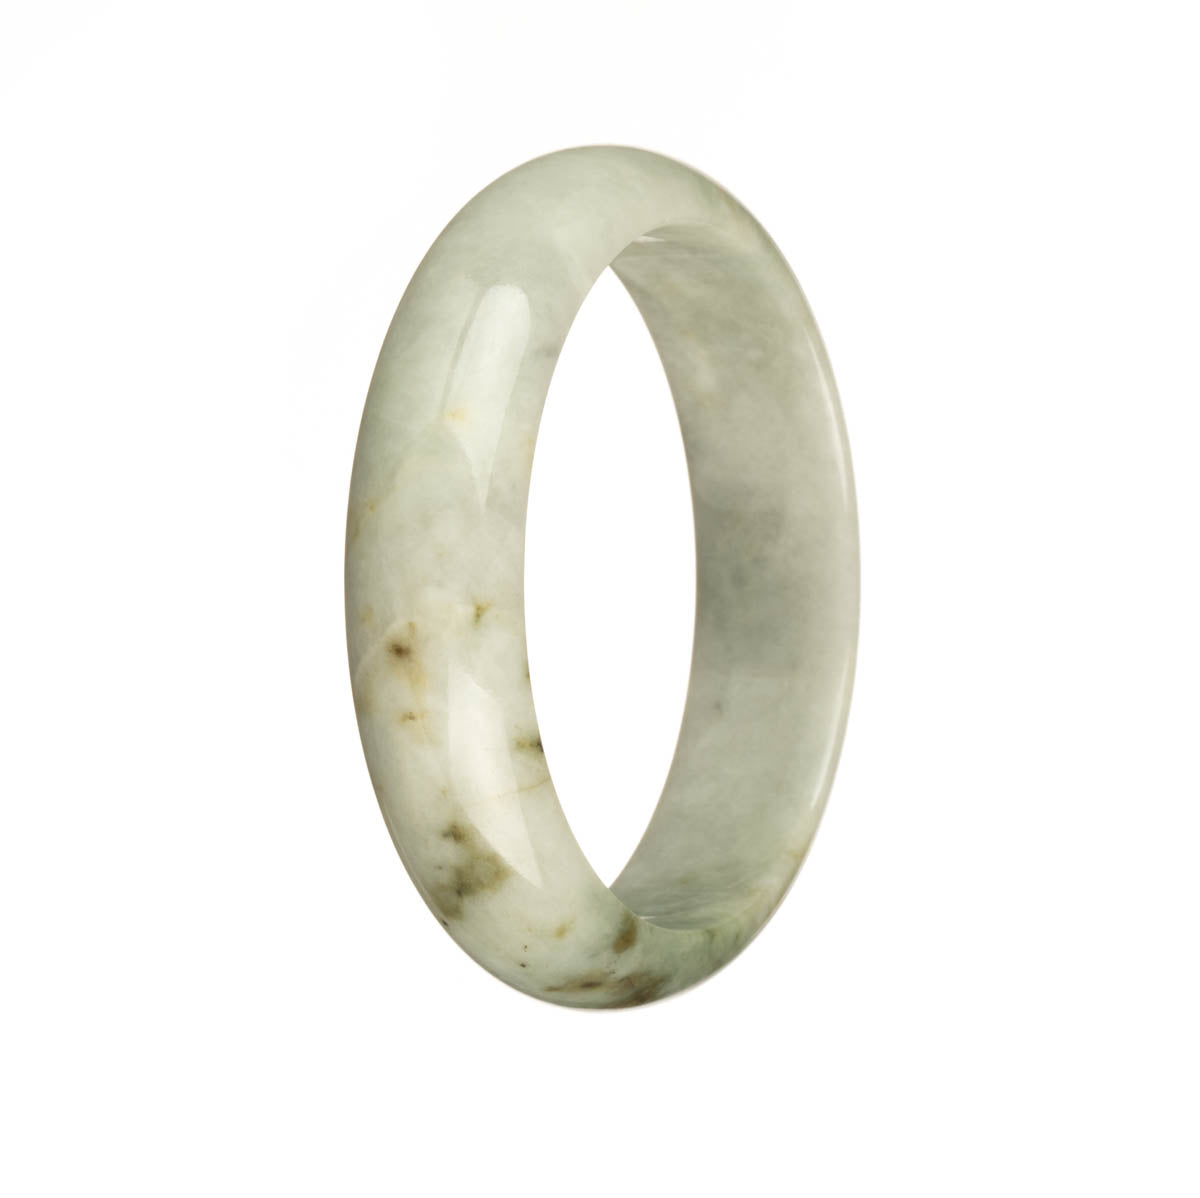 Authentic Grade A White, Pale Green with Brown Spots Burmese Jade Bracelet - 56mm Half Moon